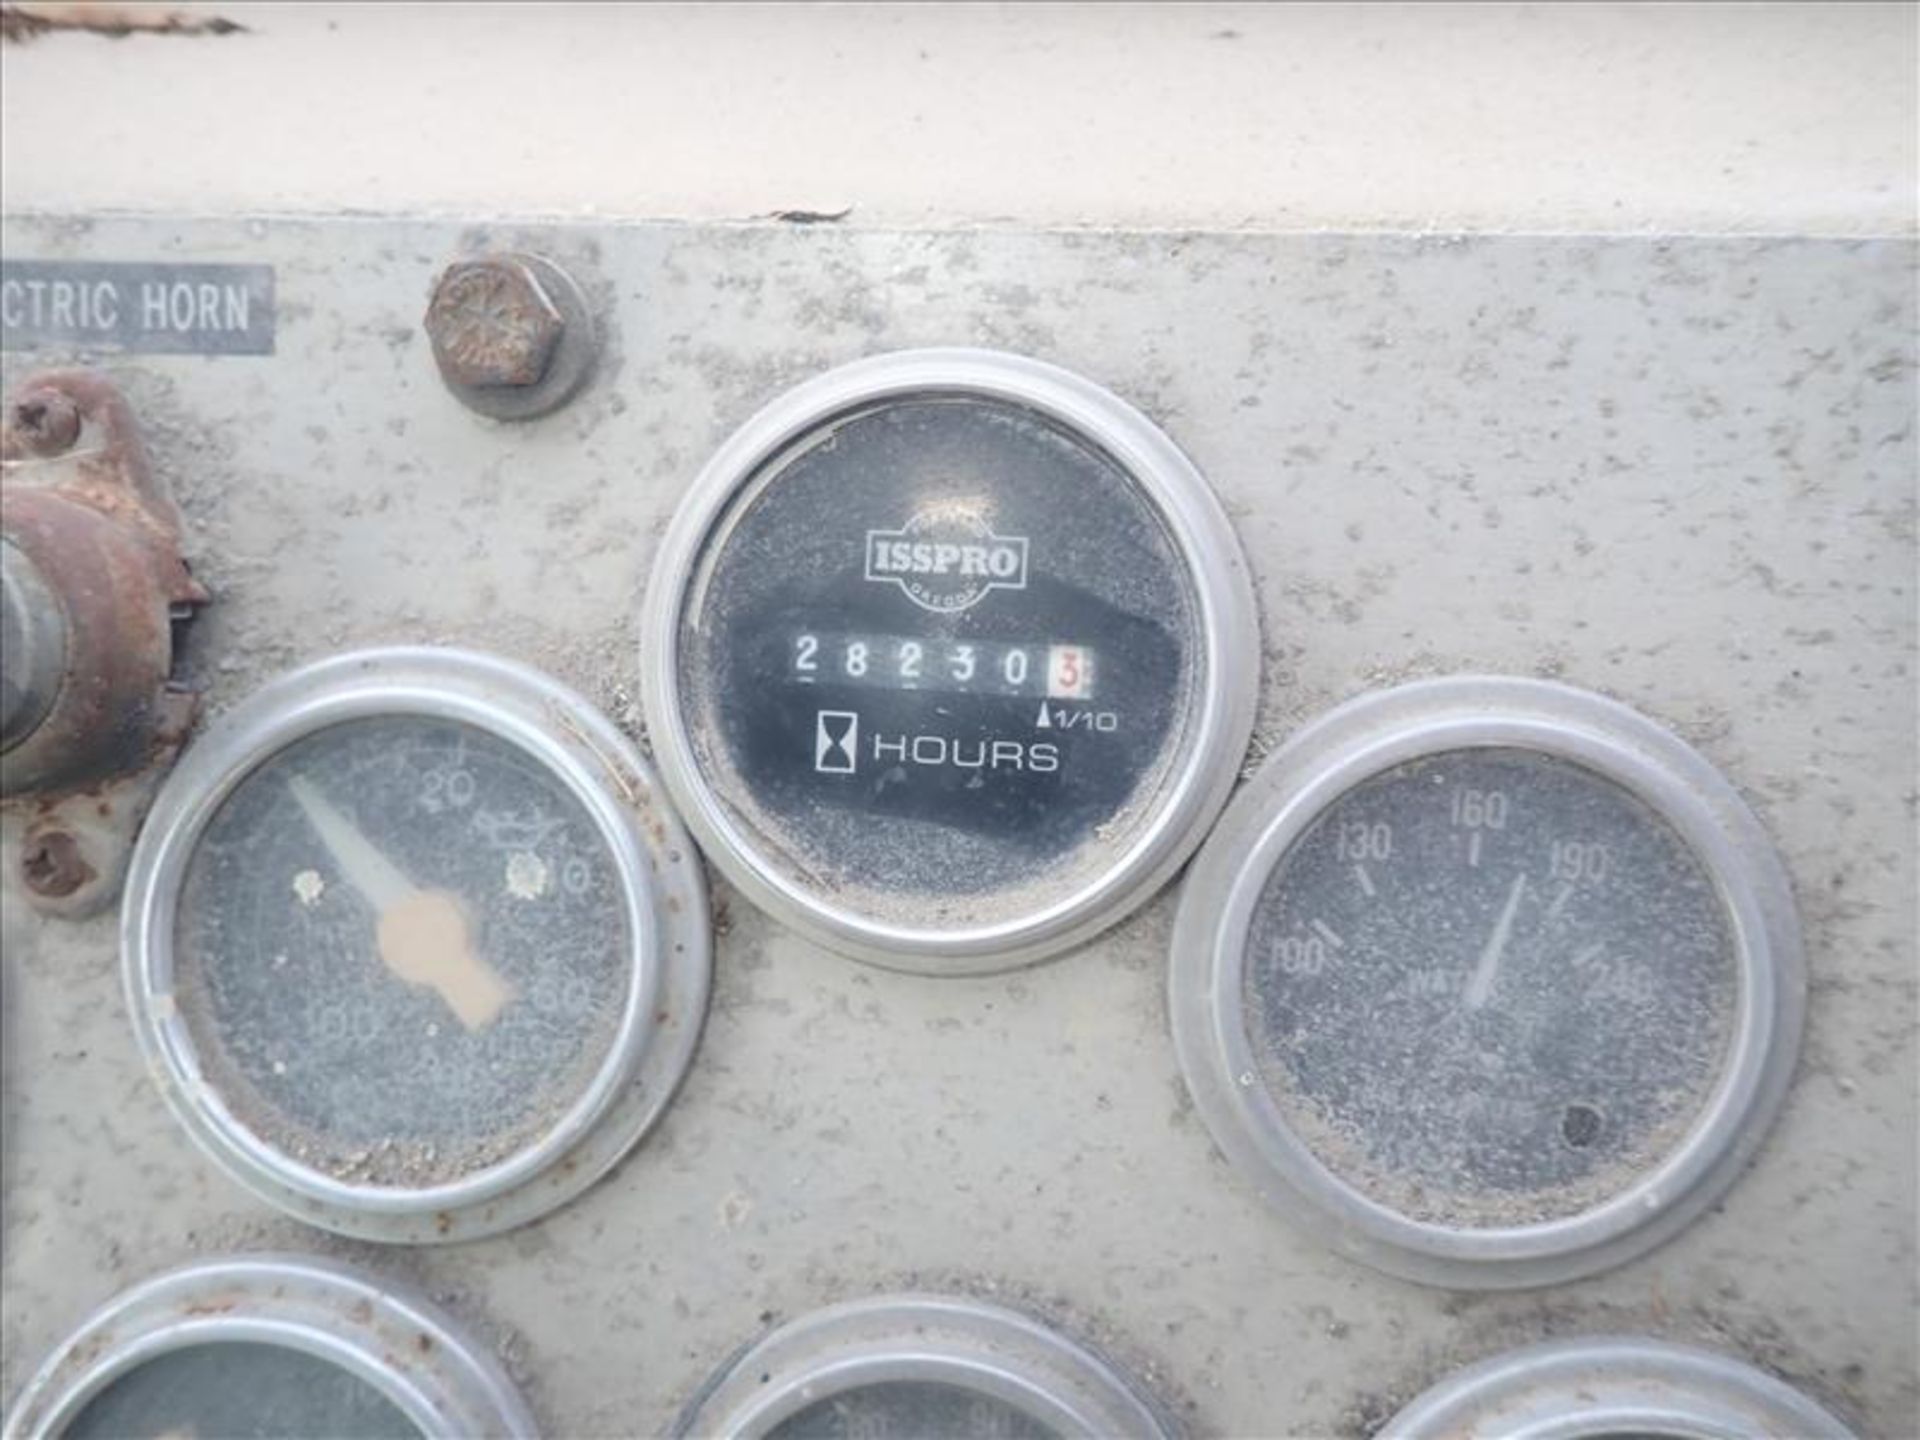 Ford Shunt Truck (SH5), meter reads 28230 hrs, dual rears (Tag No. 4970) [Sea Container N/A] { - Image 6 of 6